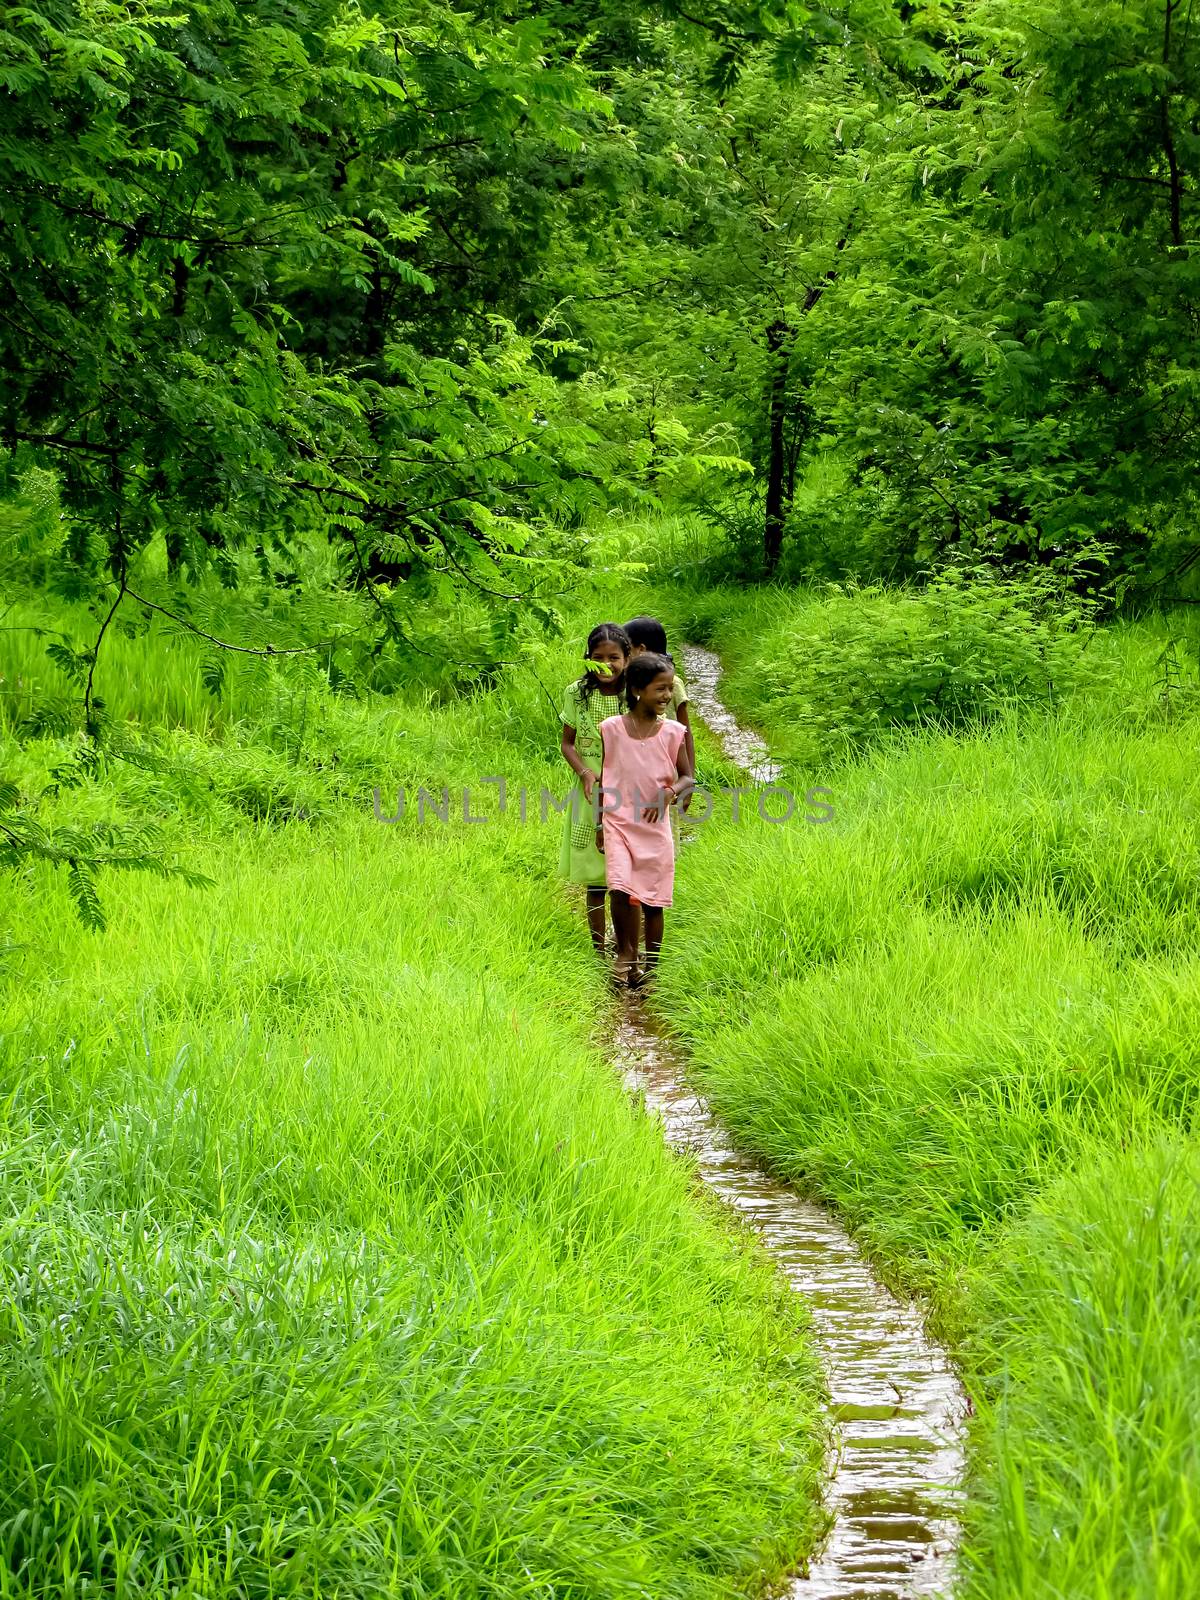 Khershet,Maharashtra,India-August 30th,2009:Village girls happily walking a small pathway surrounded by lush green fields after a drizzle in monsoon.